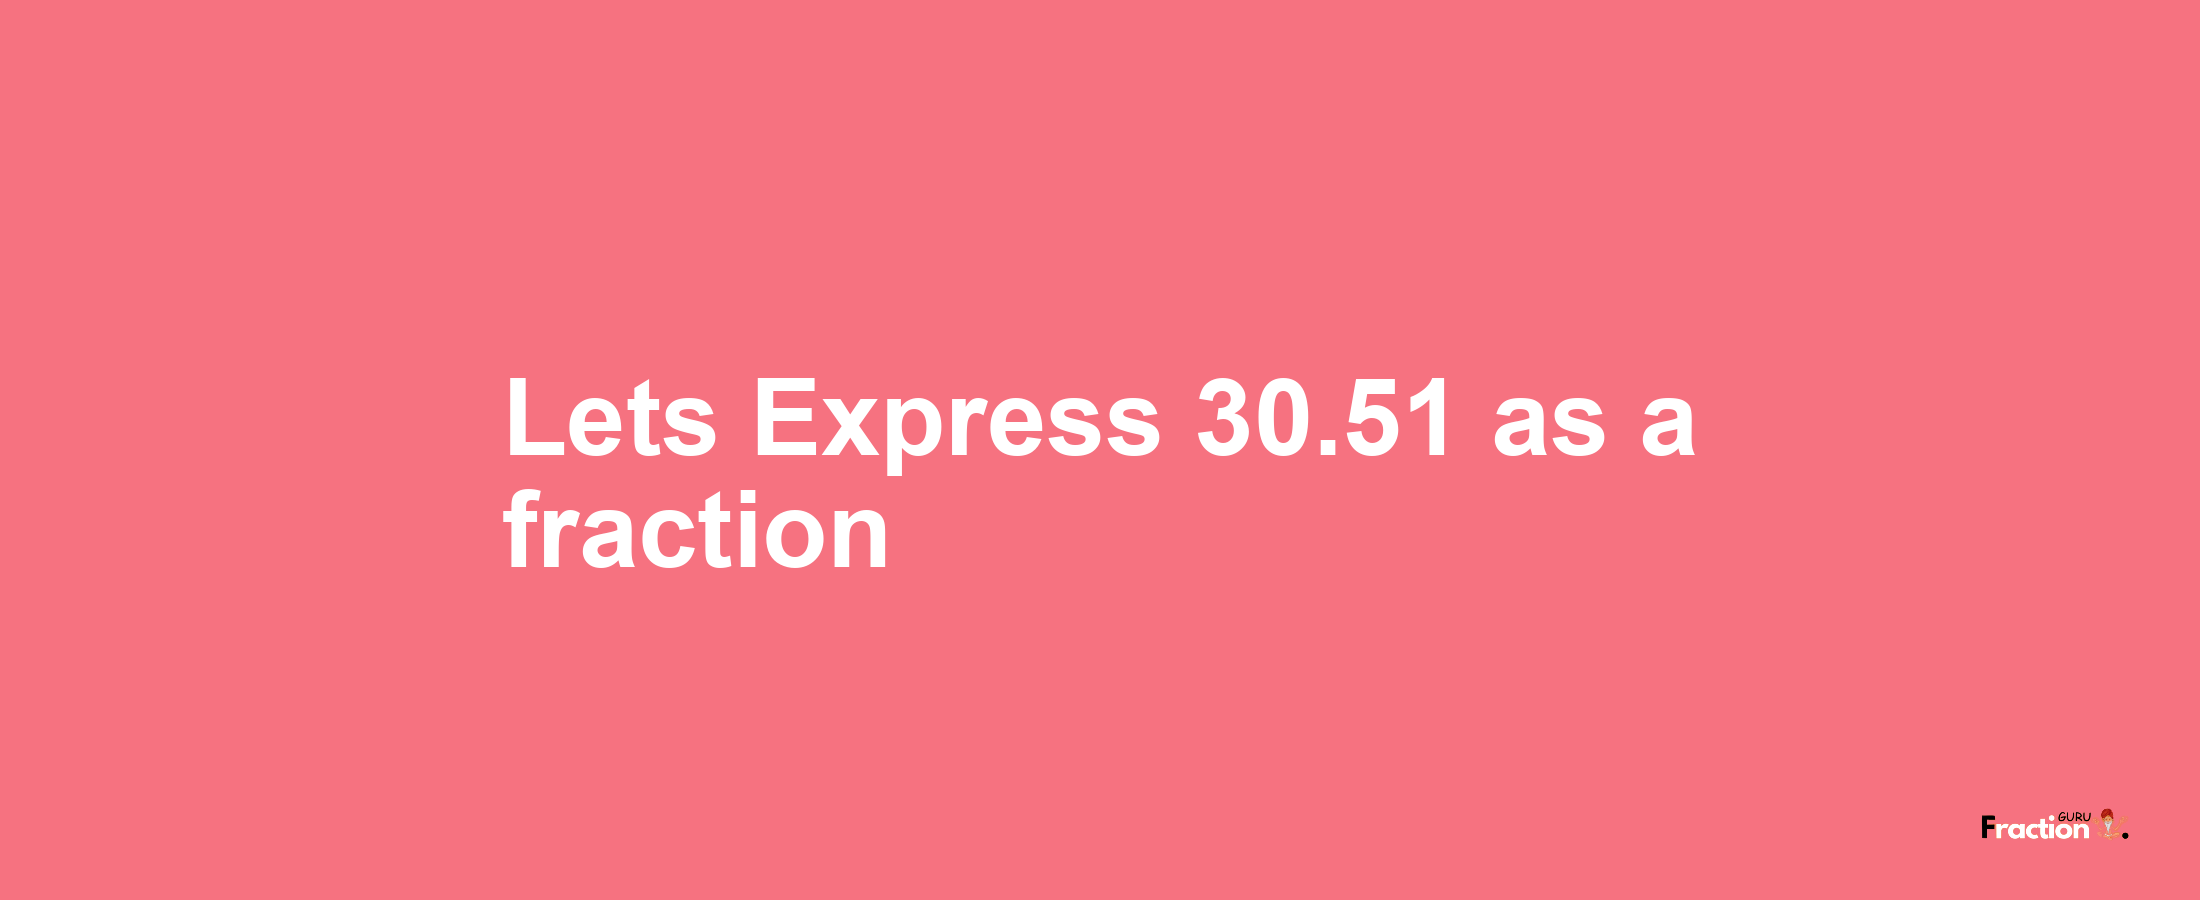 Lets Express 30.51 as afraction